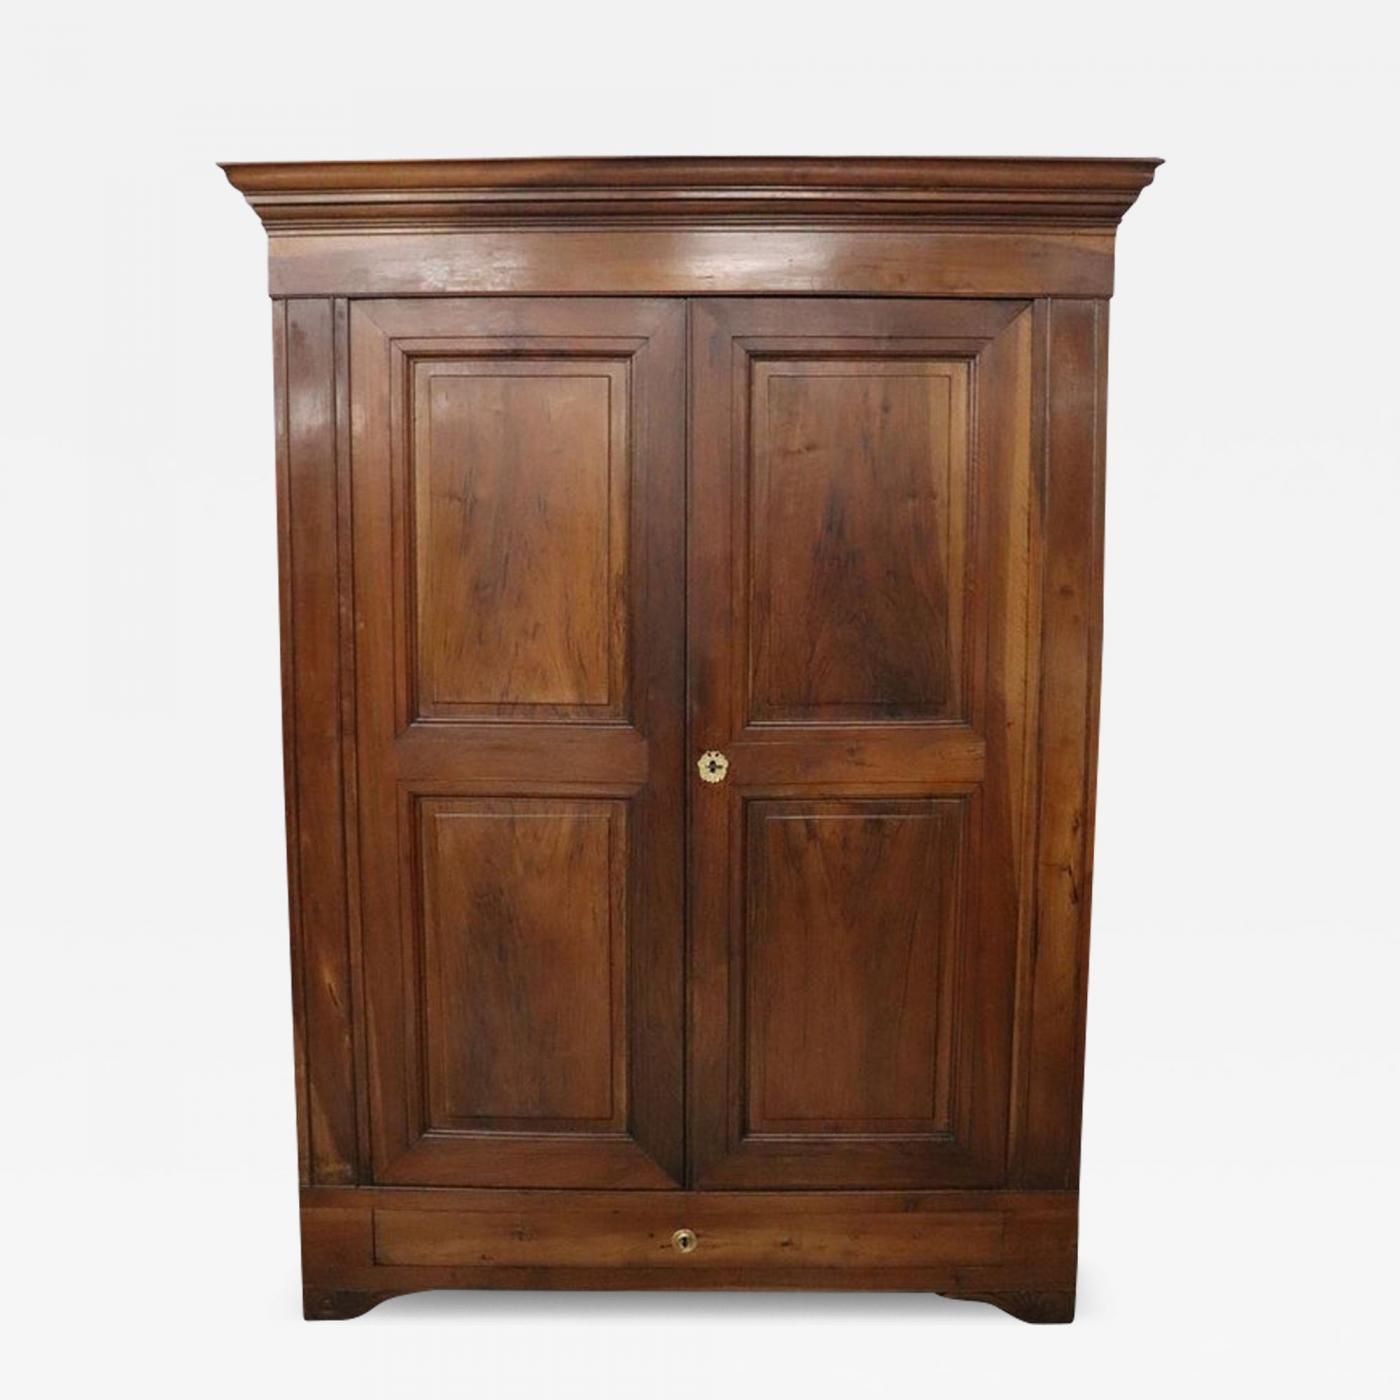 19th Century Italian Charles X Solid Walnut Antique Wardrobe Or Armoire Within Antique Style Wardrobes (View 10 of 15)